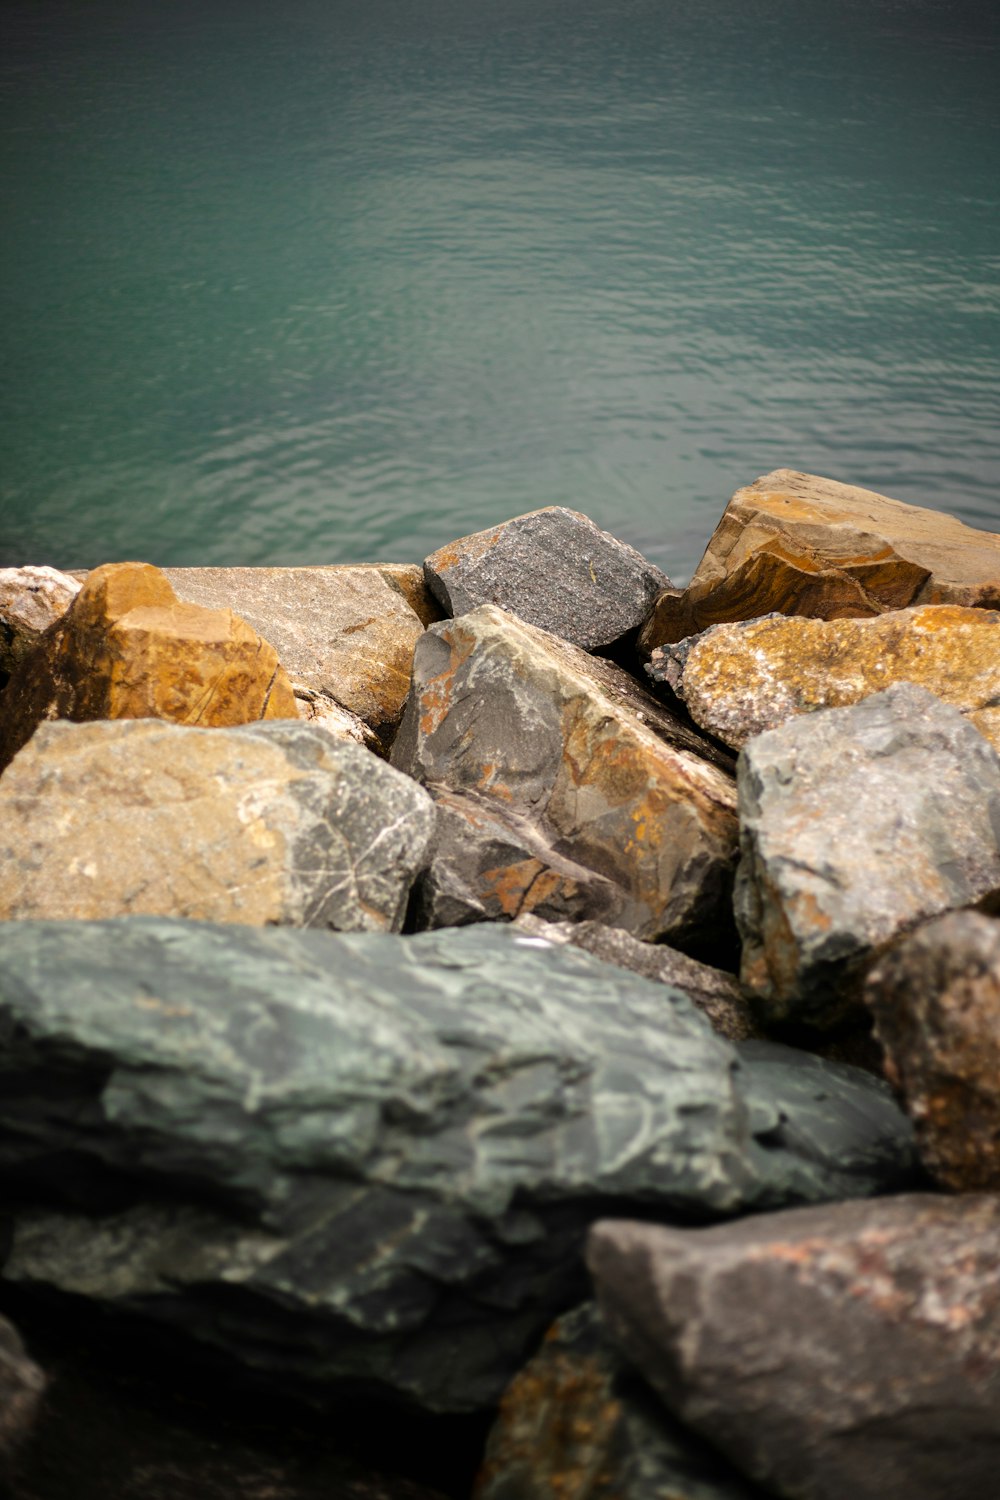 a teddy bear sitting on some rocks by the water